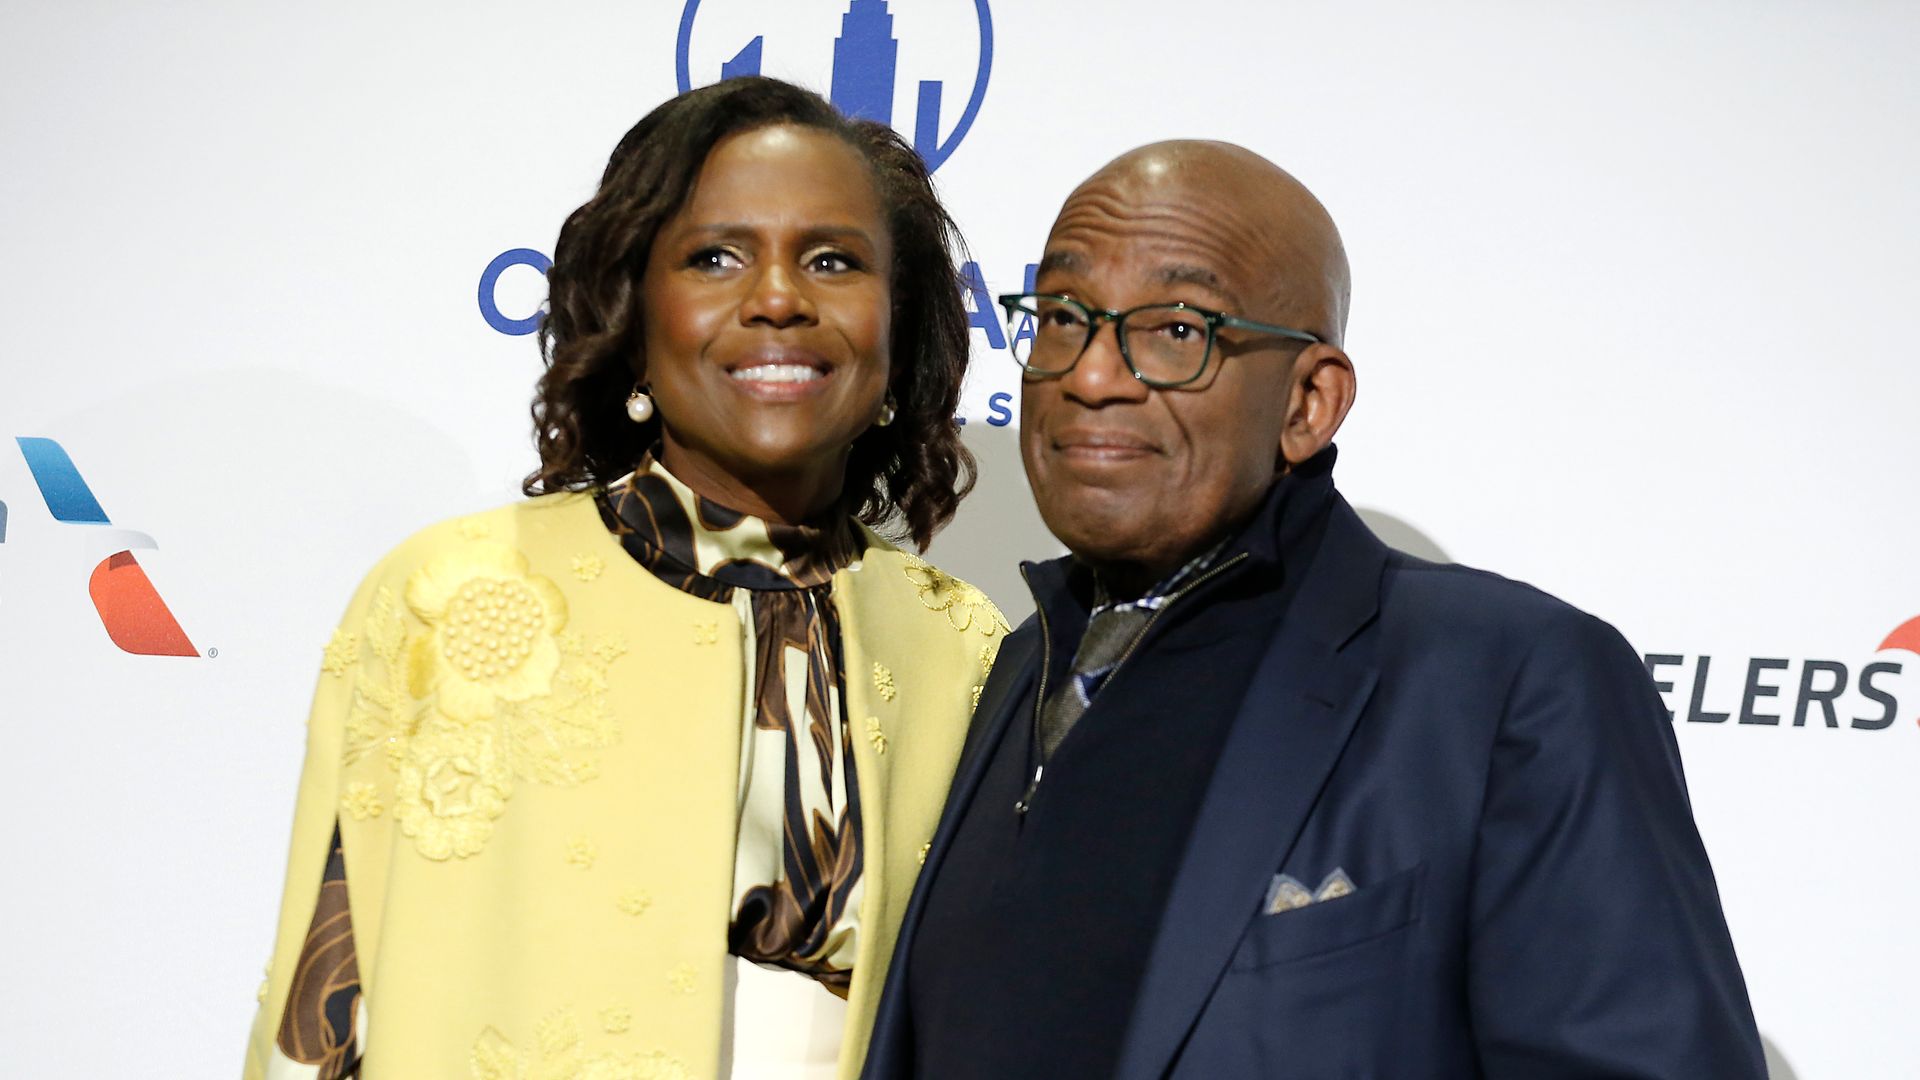 Deborah Roberts and Al Roker attend Citymeals On Wheels' 34th Annual Power Lunch at The Plaza Hotel on November 18, 2021